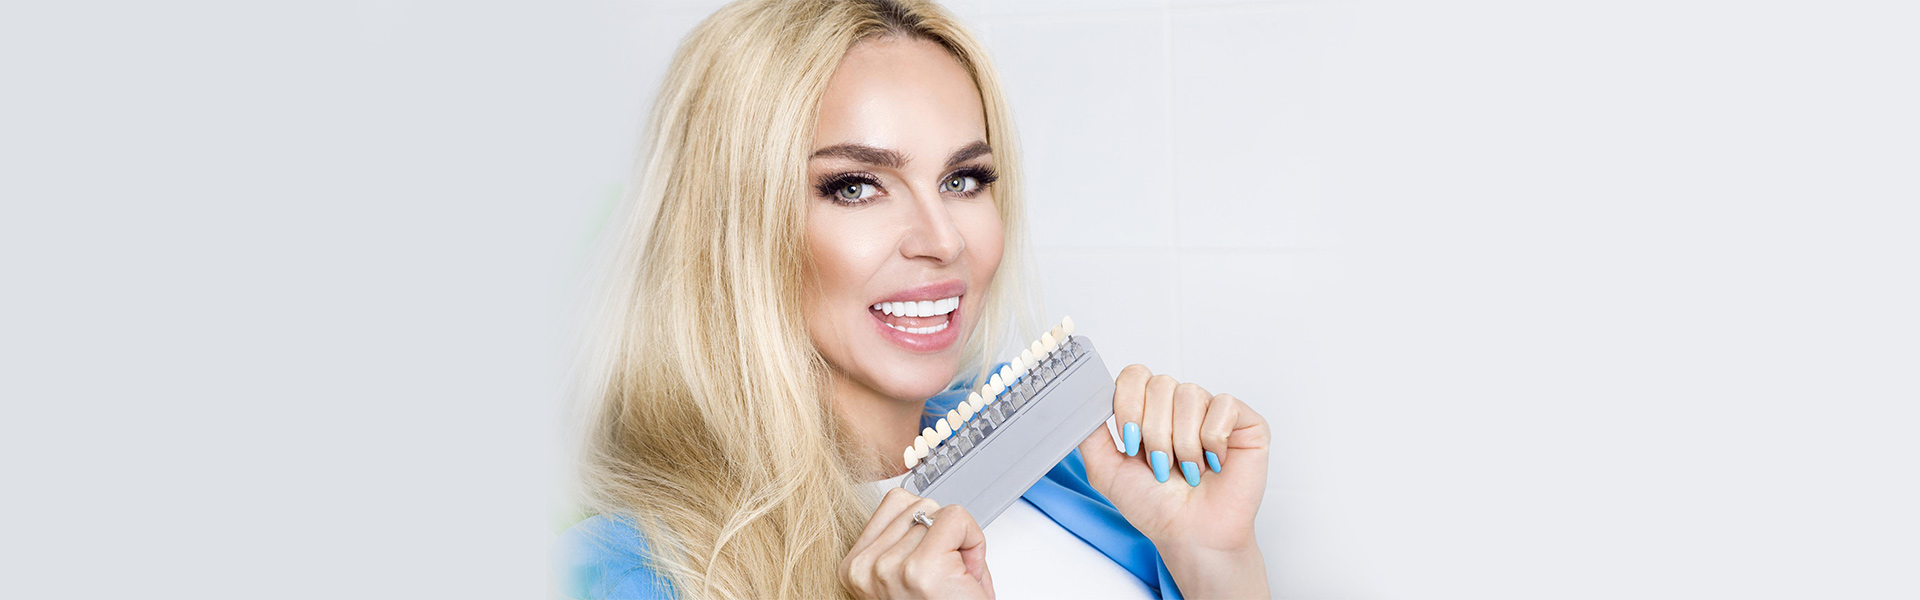 Dental Veneers: Various Types and Why You Can Have Them on Your Teeth